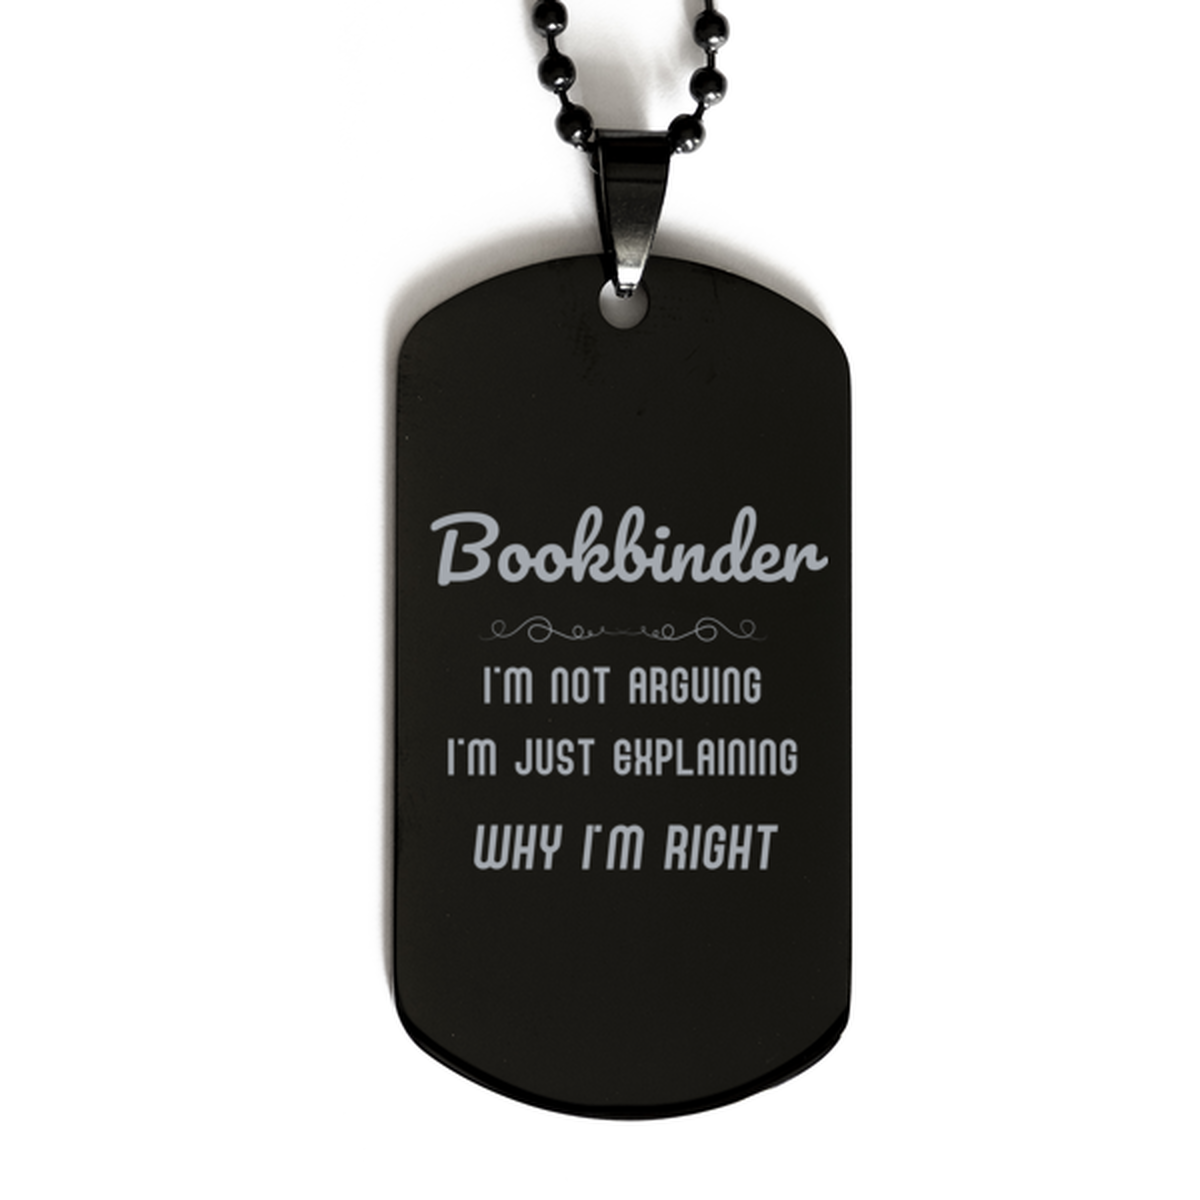 Bookbinder I'm not Arguing. I'm Just Explaining Why I'm RIGHT Black Dog Tag, Funny Saying Quote Bookbinder Gifts For Bookbinder Graduation Birthday Christmas Gifts for Men Women Coworker